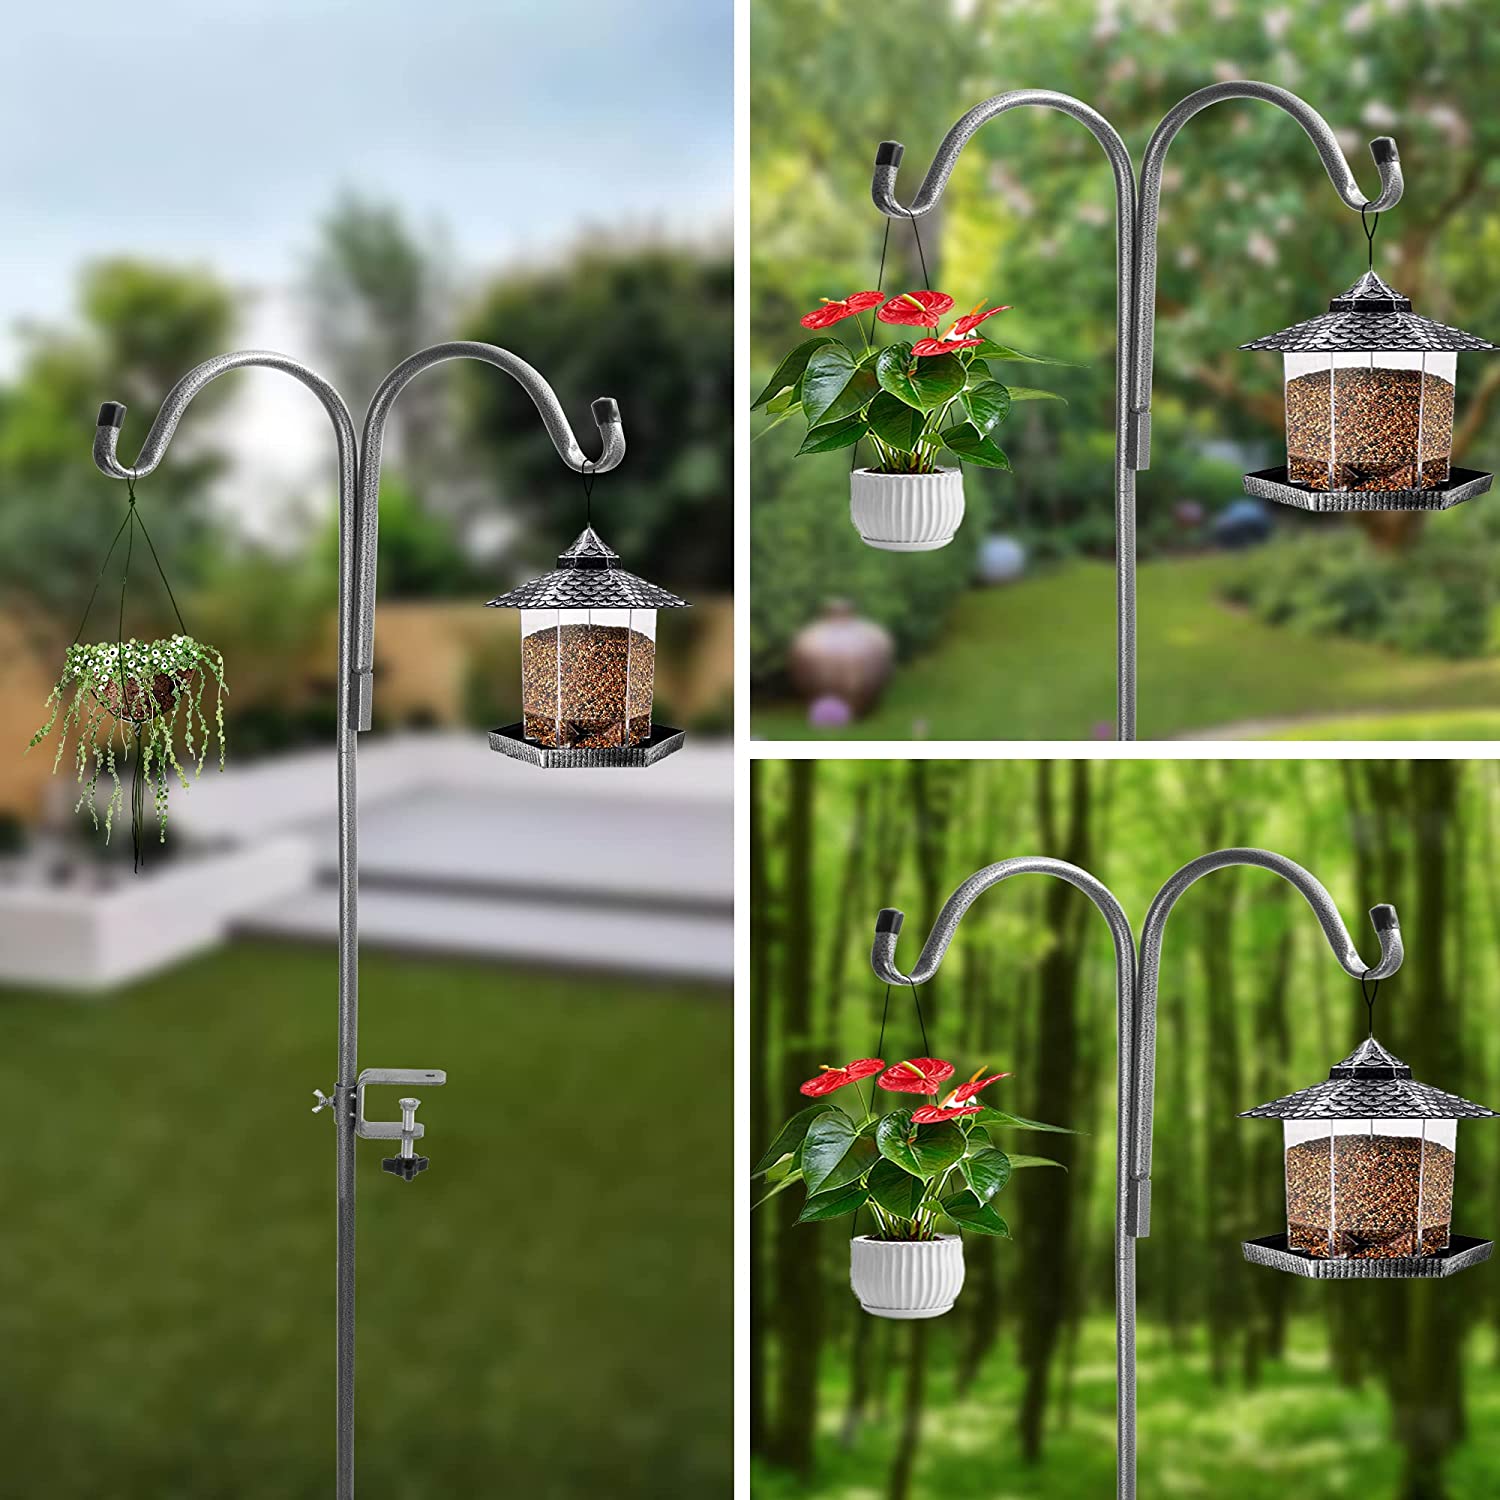 Double Shepherds Hook Adjustable Bird Feeder Pole for Outdoor with 4 Prongs Base,65 Inch Heavy Duty Garden Hanging Plant Hooks Stand Outside for Plant Hanger Wedding Decoration (Pack of 2) - image 2 of 7